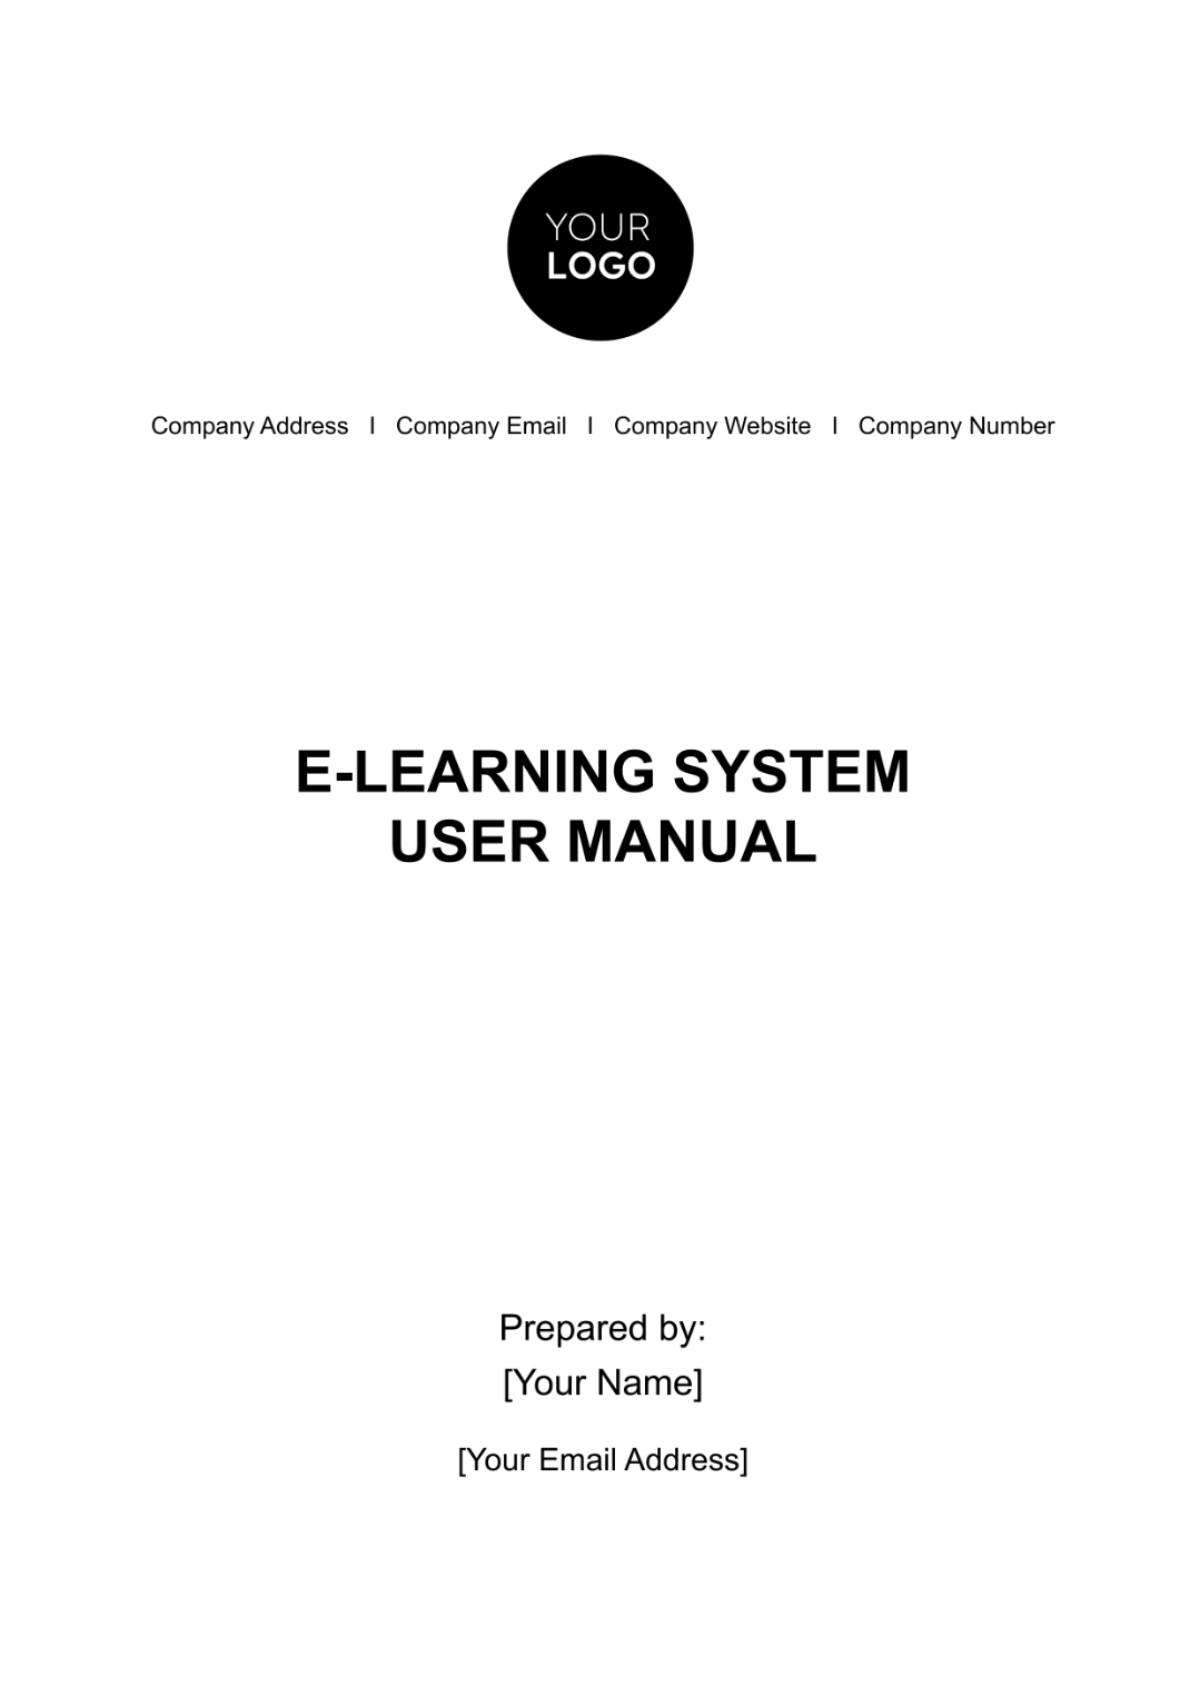 Free E-learning System User Manual HR Template